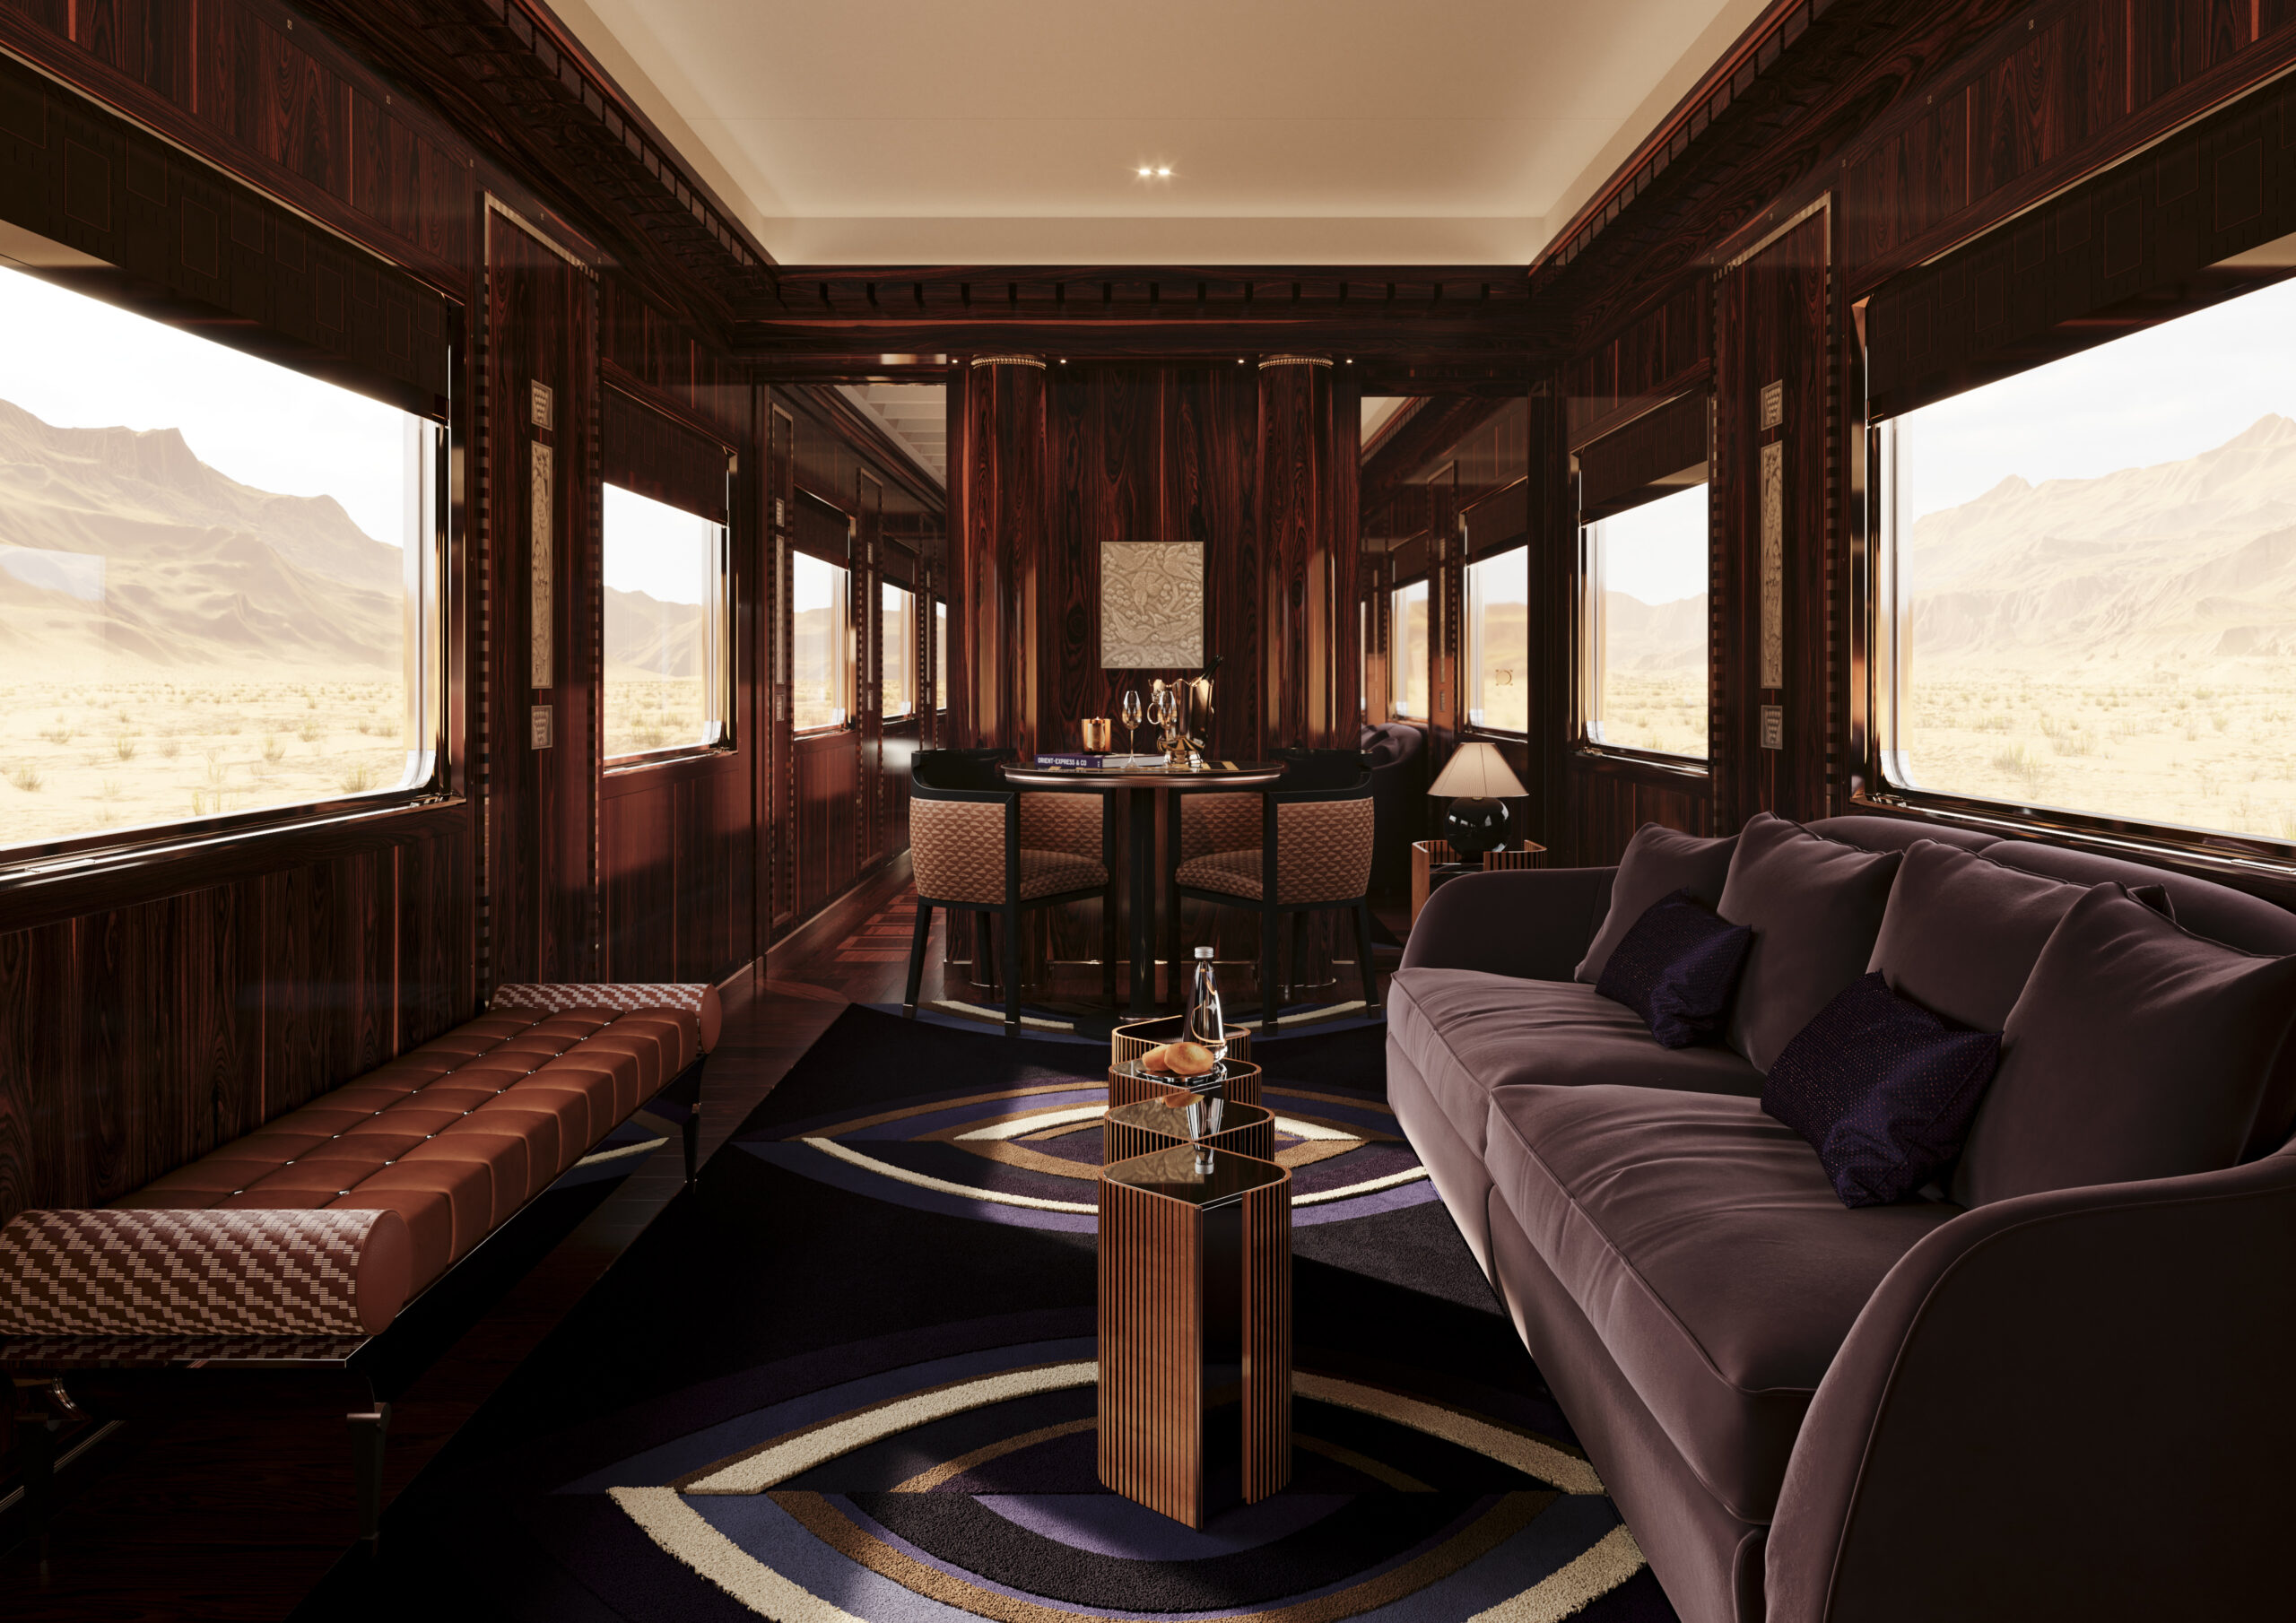 Download this stock image: The Venice Simplon Orient-Express